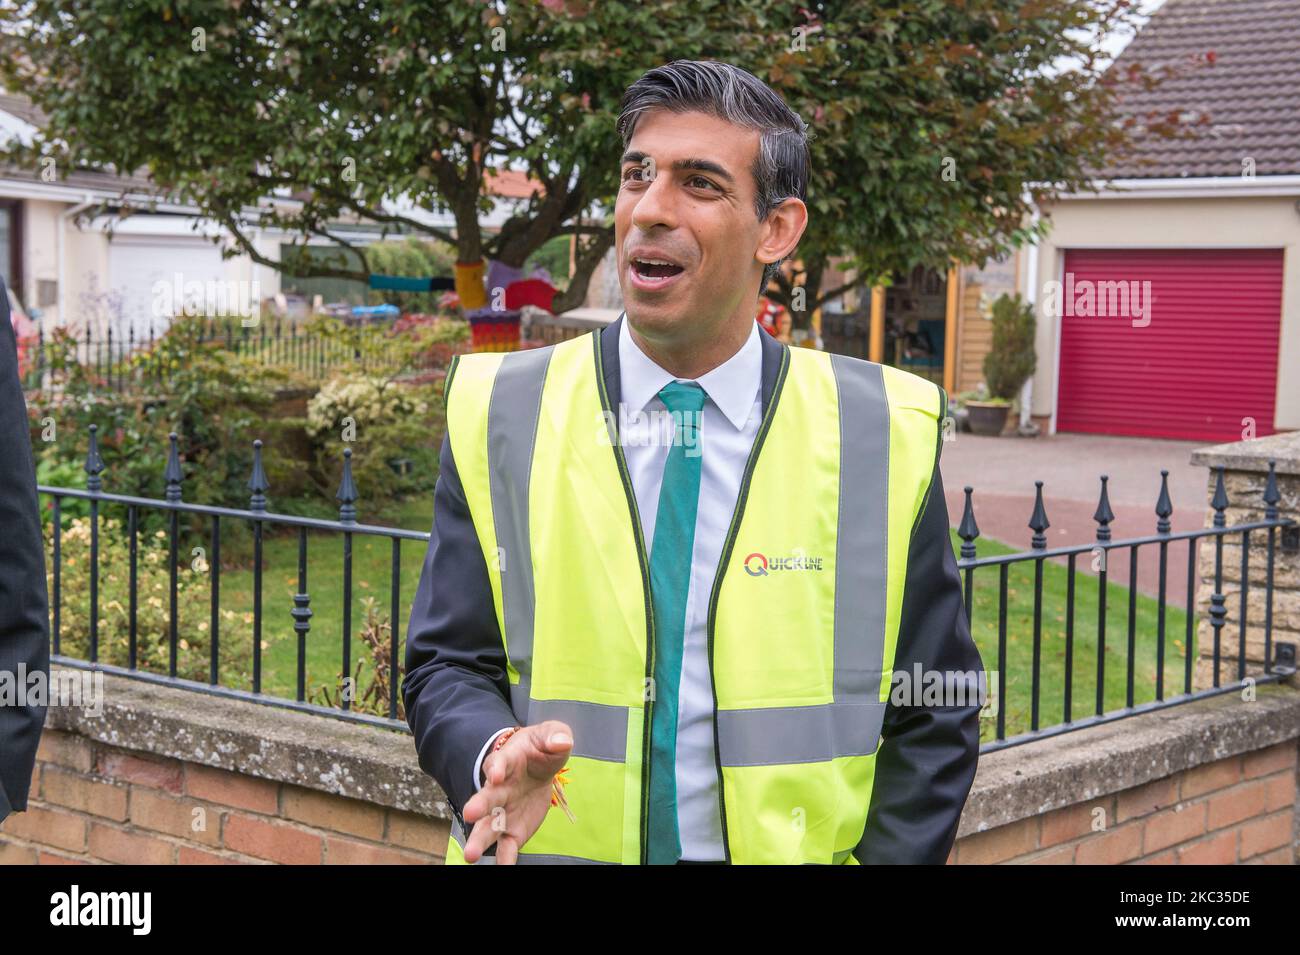 3 September 2021: Visit by Rishi Sunak to the village of Picton in North Yorkshire to see the rollout of fibre broadband by Hessle based company Quick Stock Photo